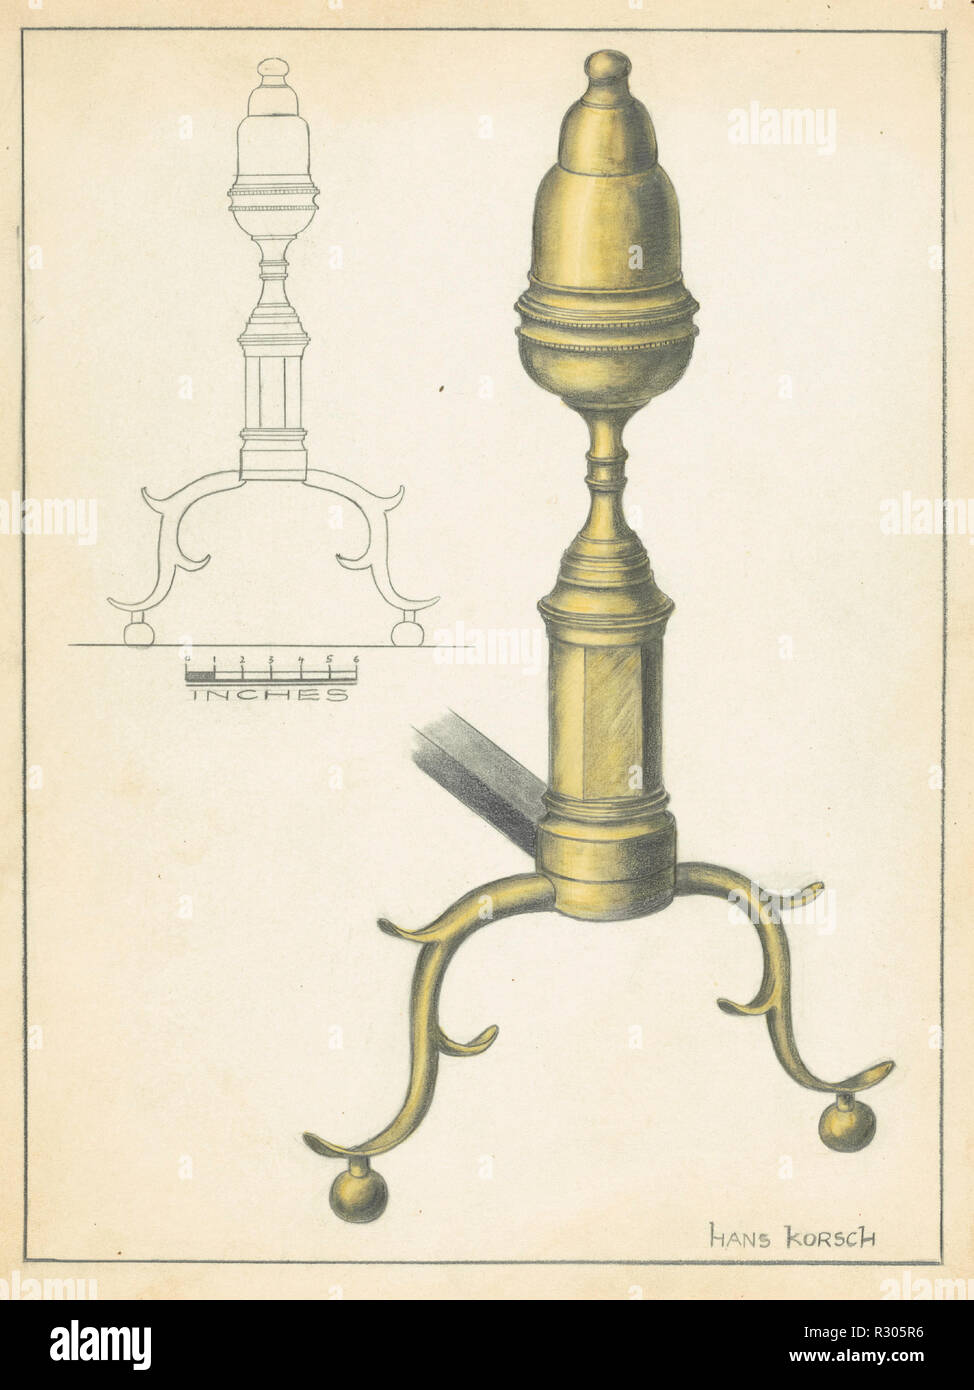 Andiron (one of pair). Dated: c. 1936. Dimensions: overall: 29.3 x 22.2 cm (11 9/16 x 8 3/4 in.)  Original IAD Object: 20 1/2' high. Medium: watercolor and graphite on paperboard. Museum: National Gallery of Art, Washington DC. Author: Hans Korsch. Stock Photo